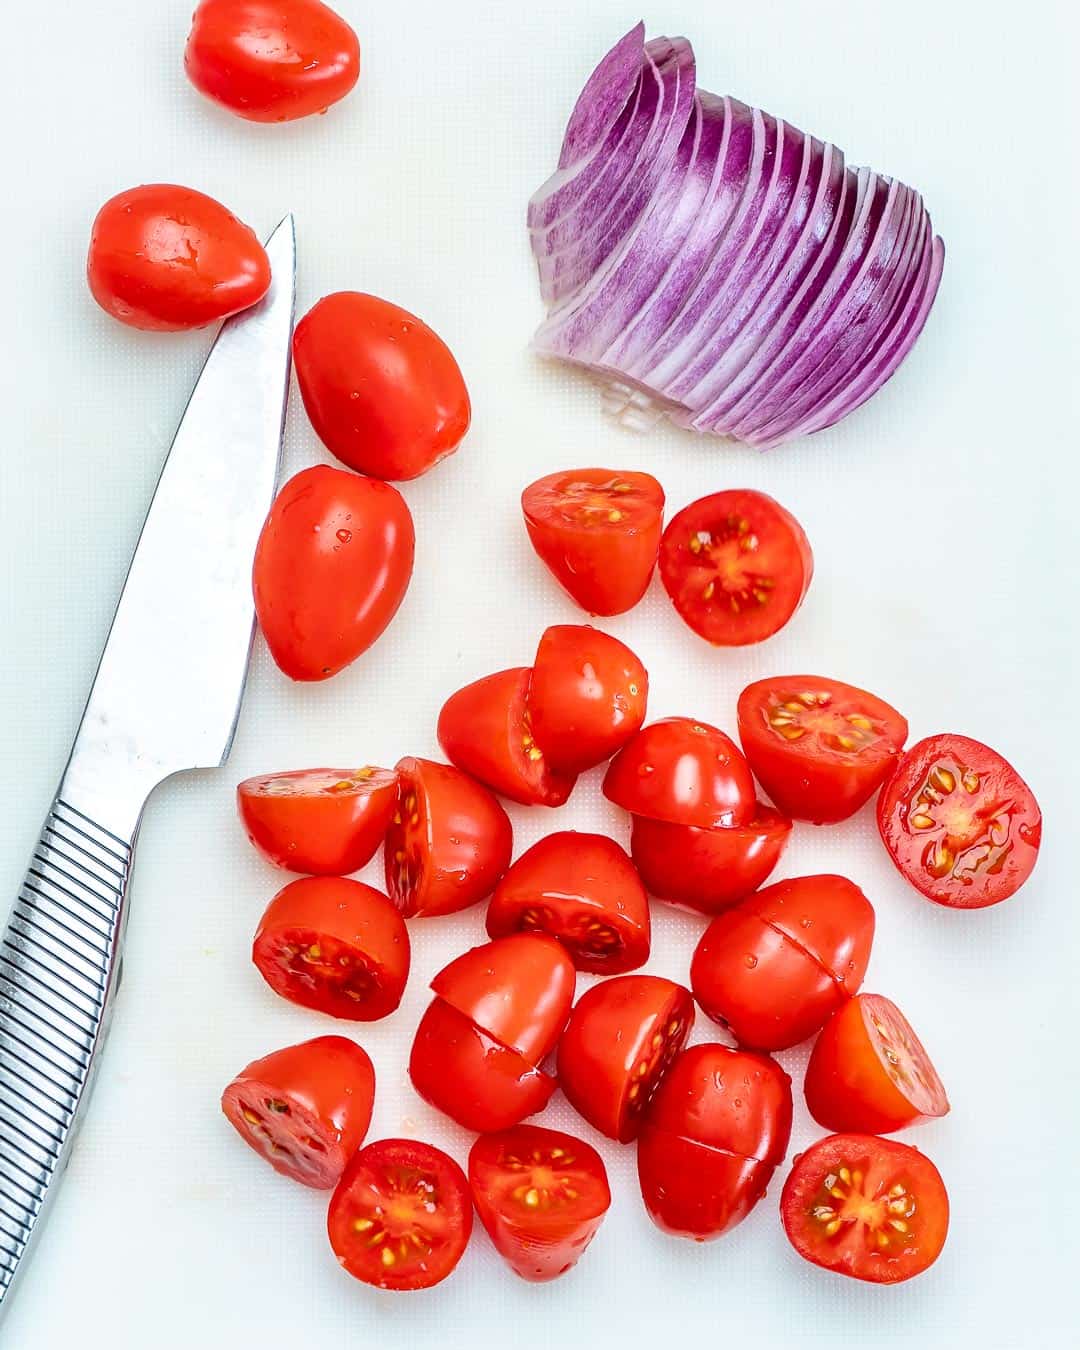 chopped tomatoes and sliced red onion